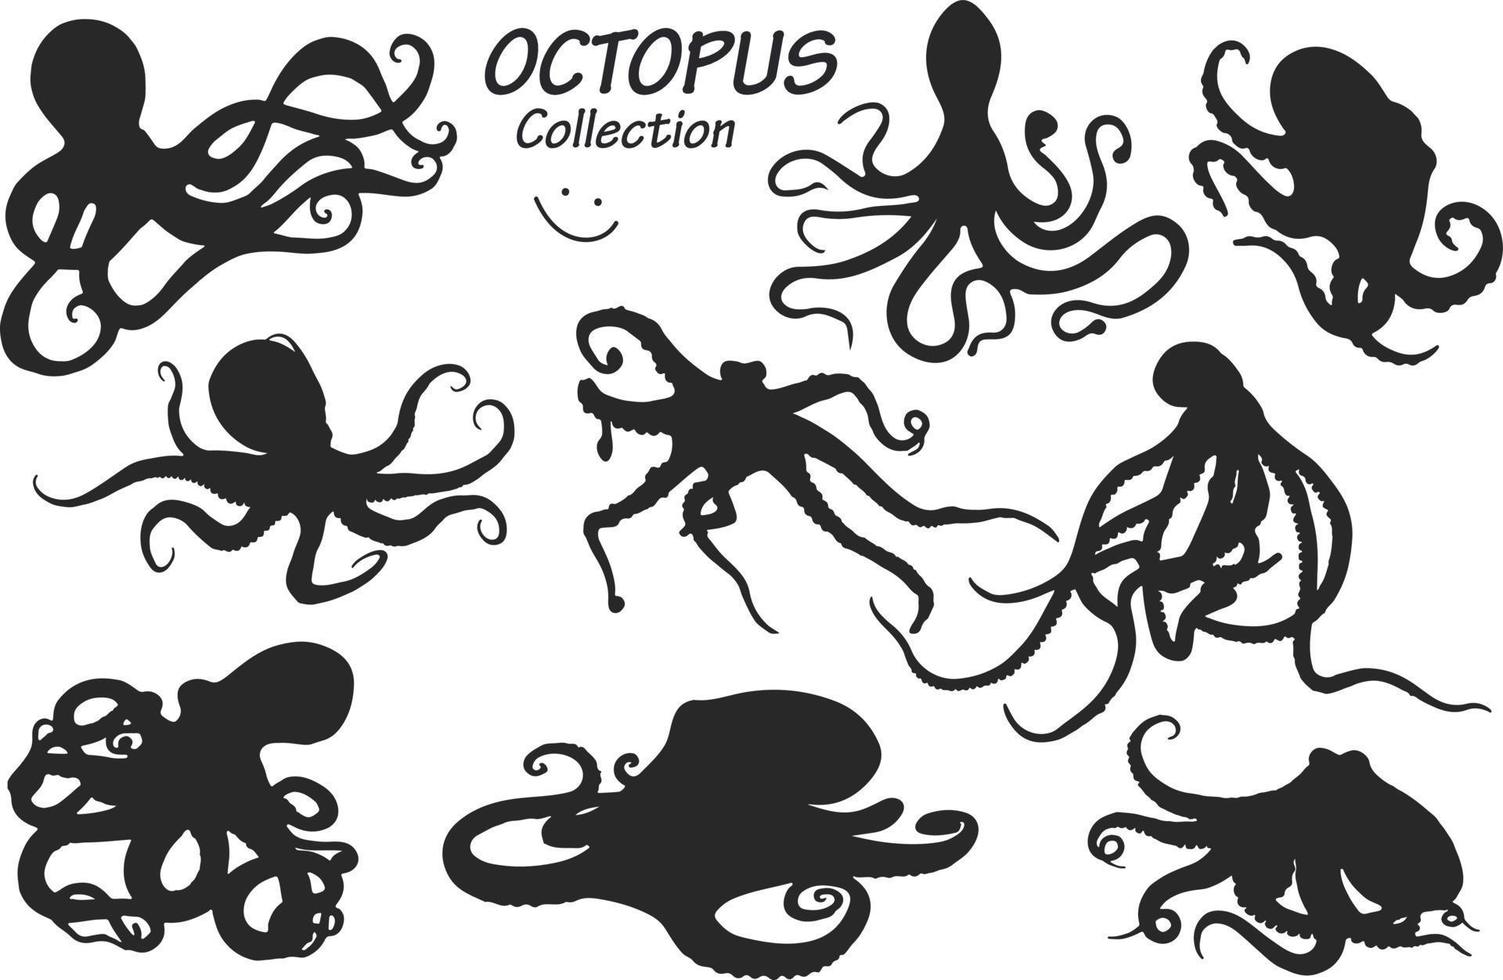 octopus silhouettes collection vector